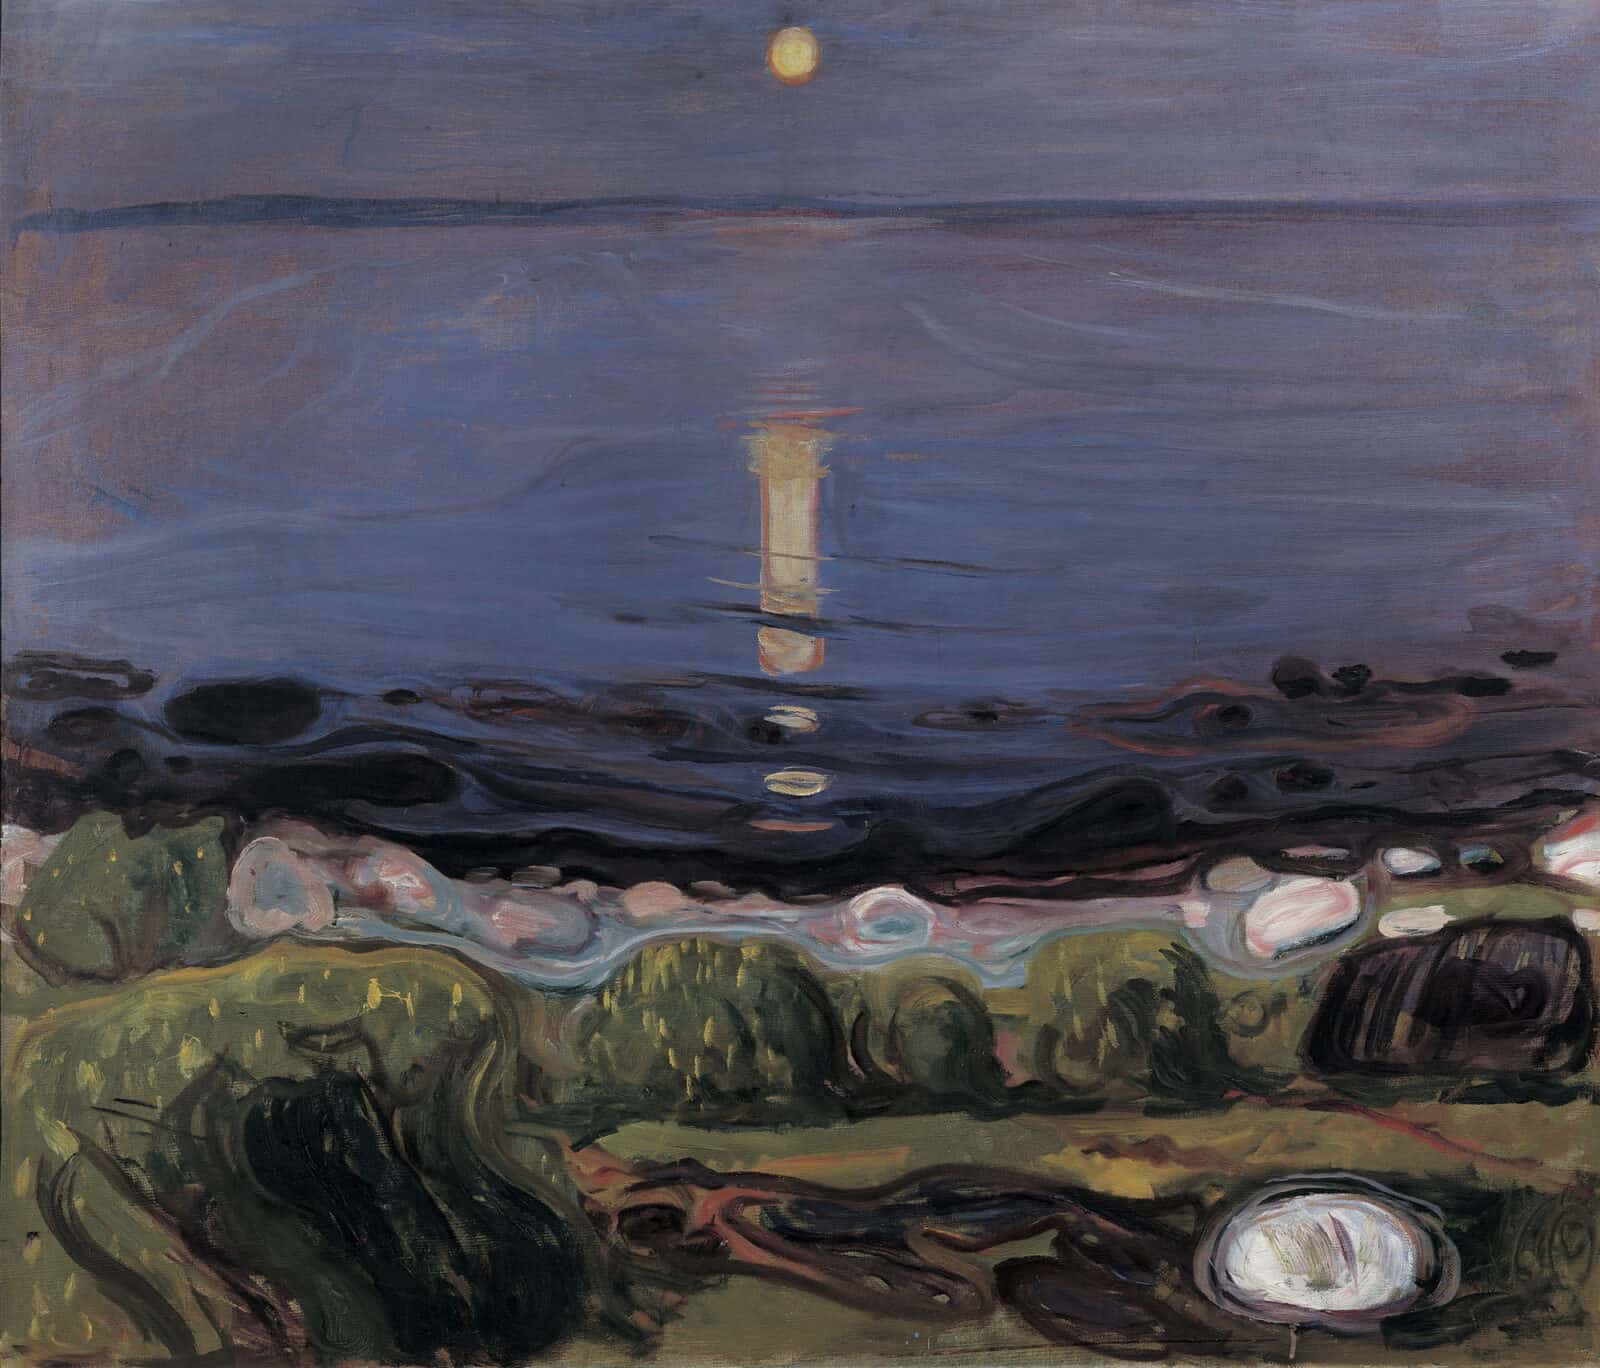 Edvard Munch, Summer Night by the Beach (detail), 1902–03, oil on canvas. Private collection, © Artists Rights Society New York